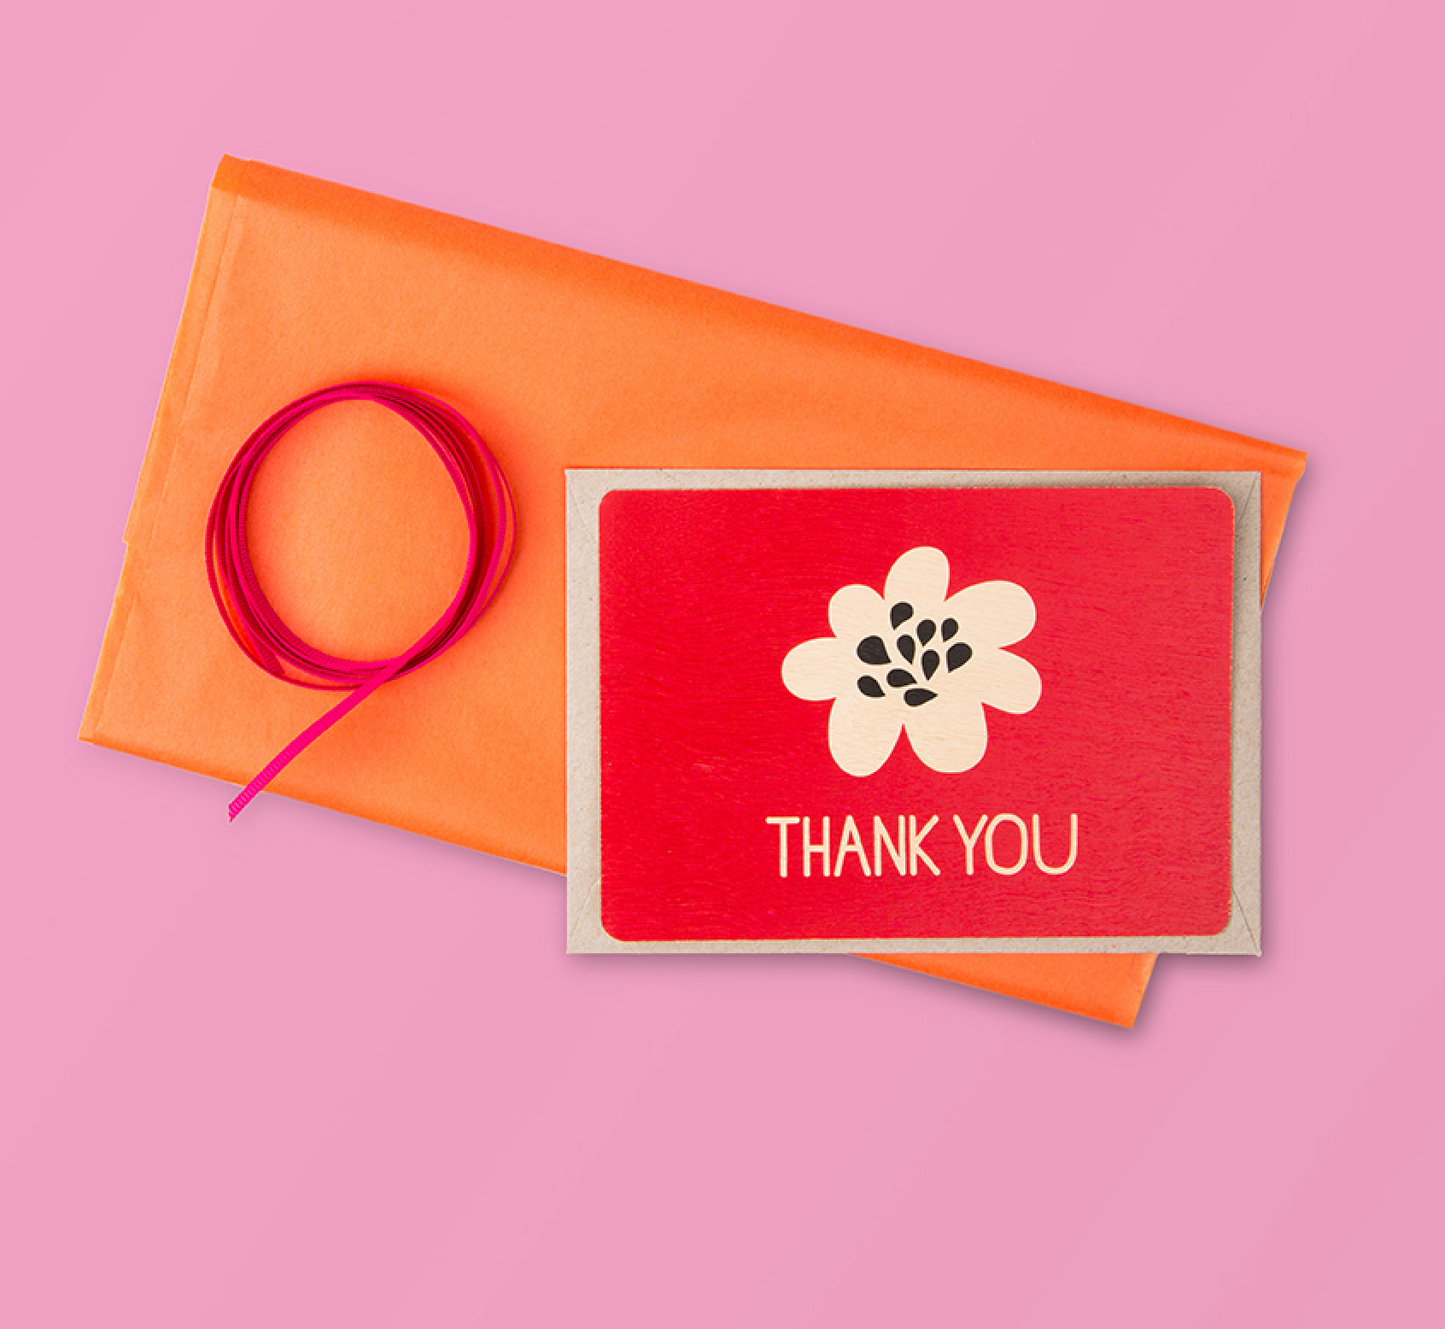 Timber Red Thank YOu Postcard on orange tissue paper, with red ribbon and pink background